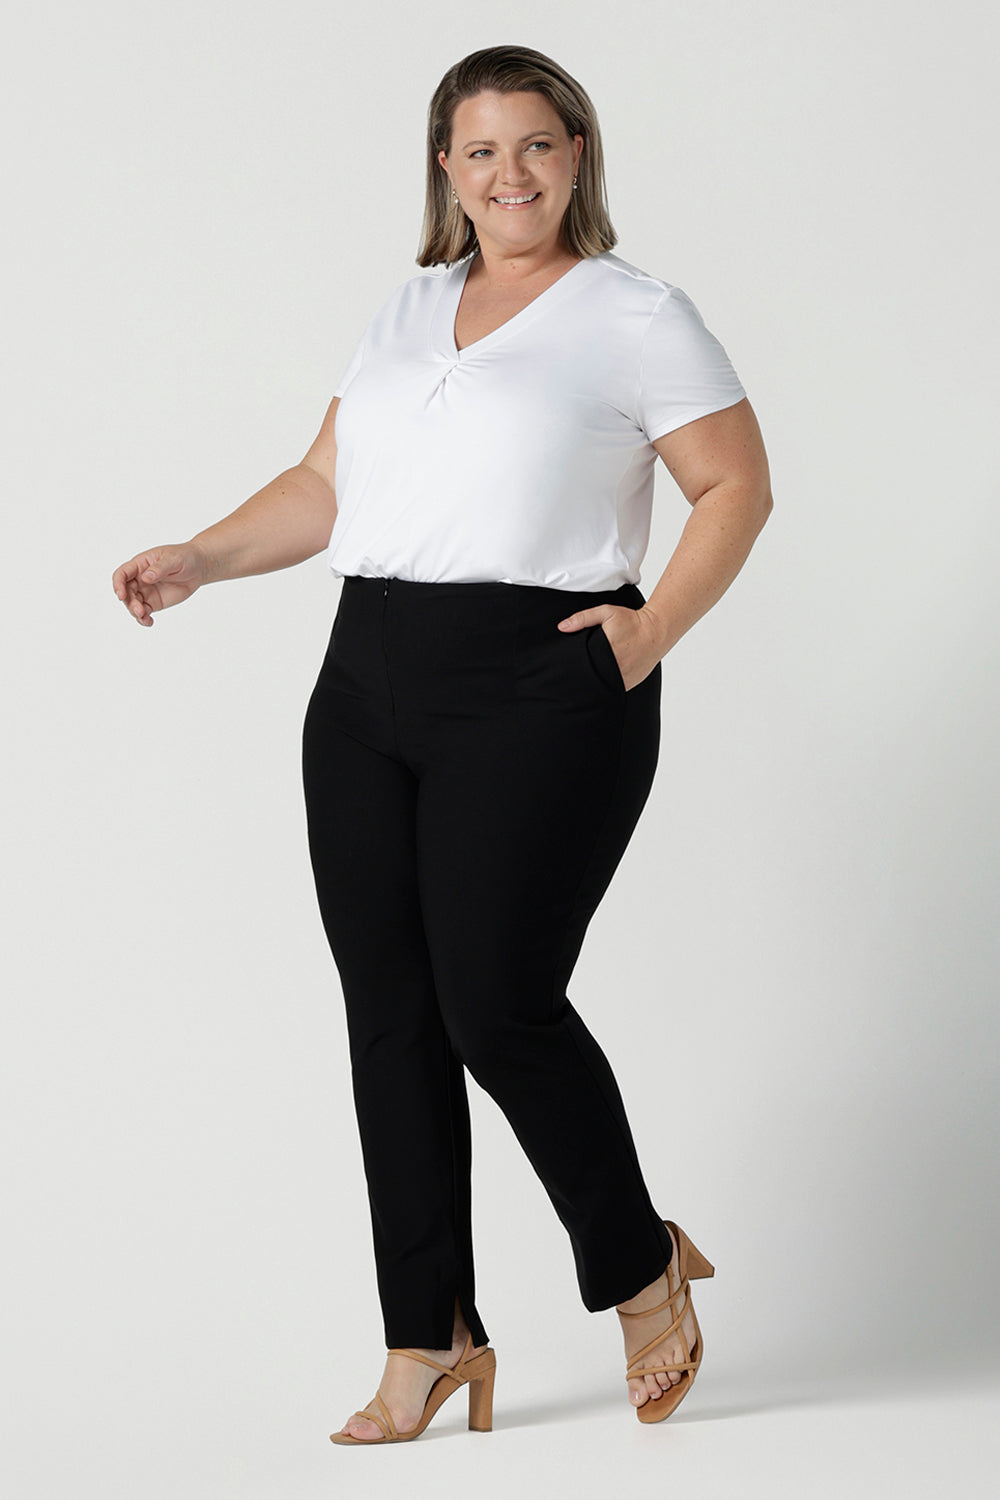 A plus size, size 18 woman wears slim leg, black pants by Australian and New Zealand women's clothing brand, L&F. These comfortable work pants are worn with a white Emily top in bamboo. Made in Australia for women size 8 - 24.